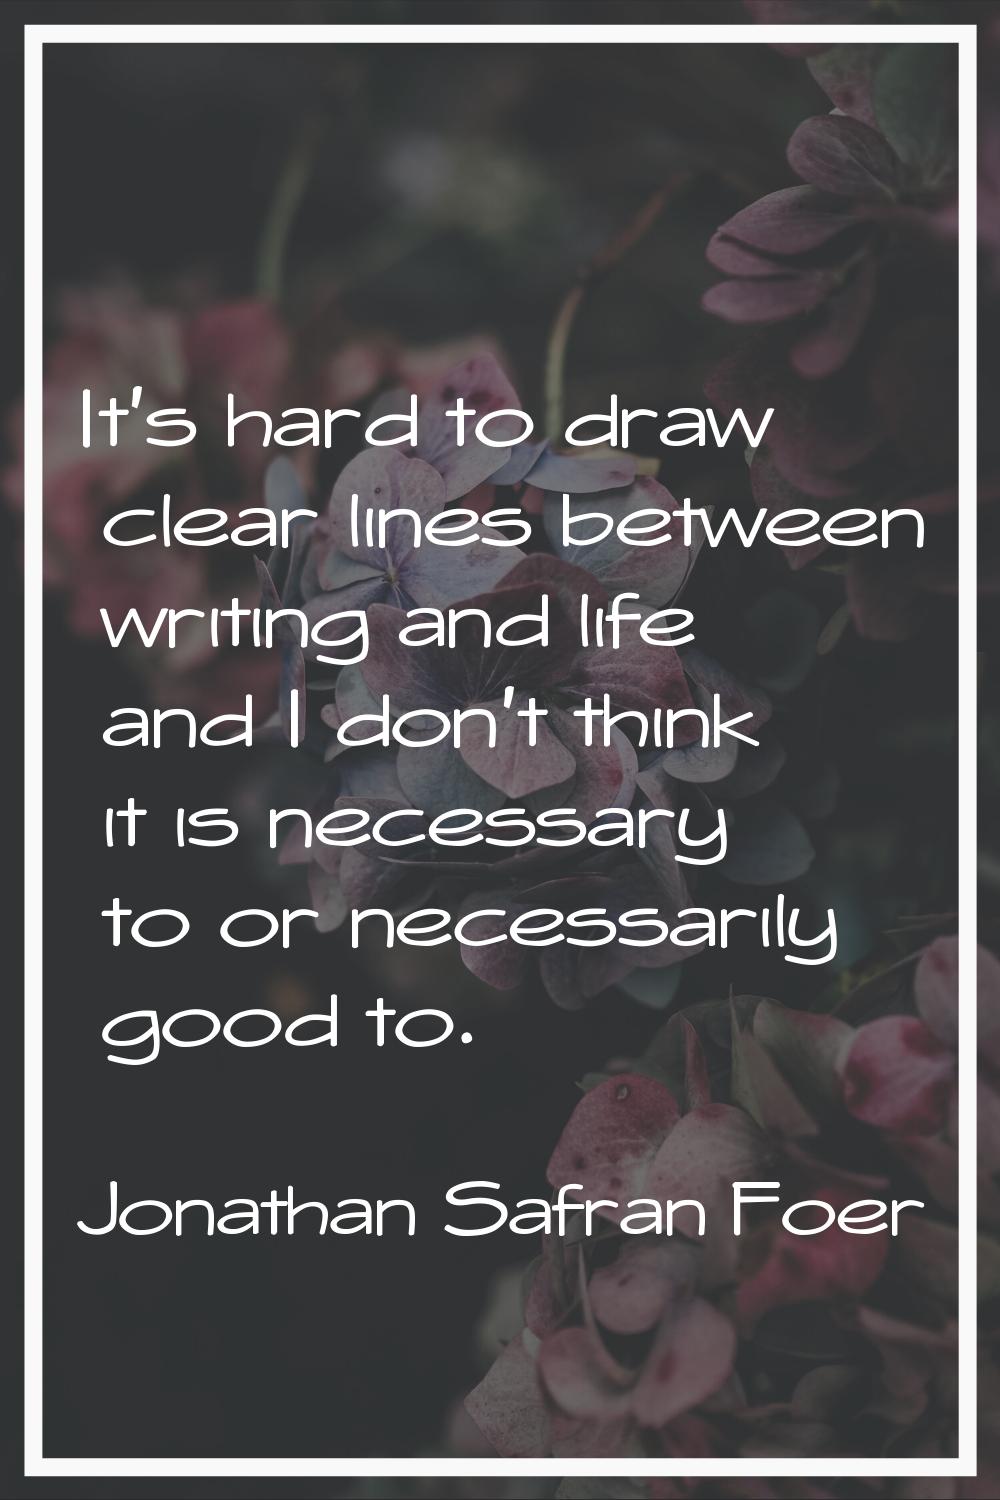 It's hard to draw clear lines between writing and life and I don't think it is necessary to or nece